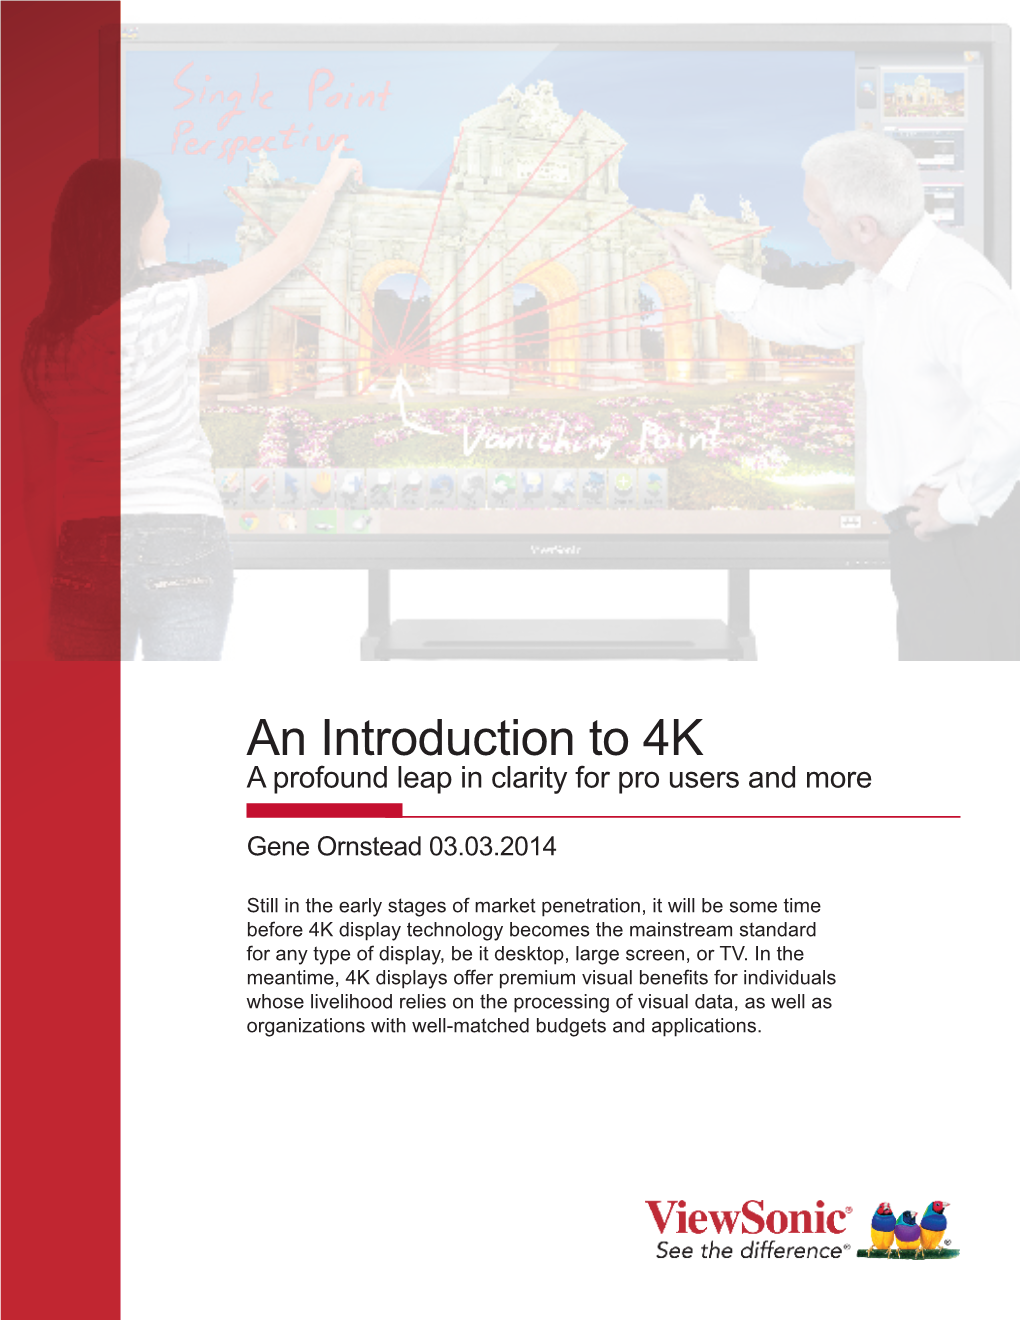 An Introduction to 4K a Profound Leap in Clarity for Pro Users and More